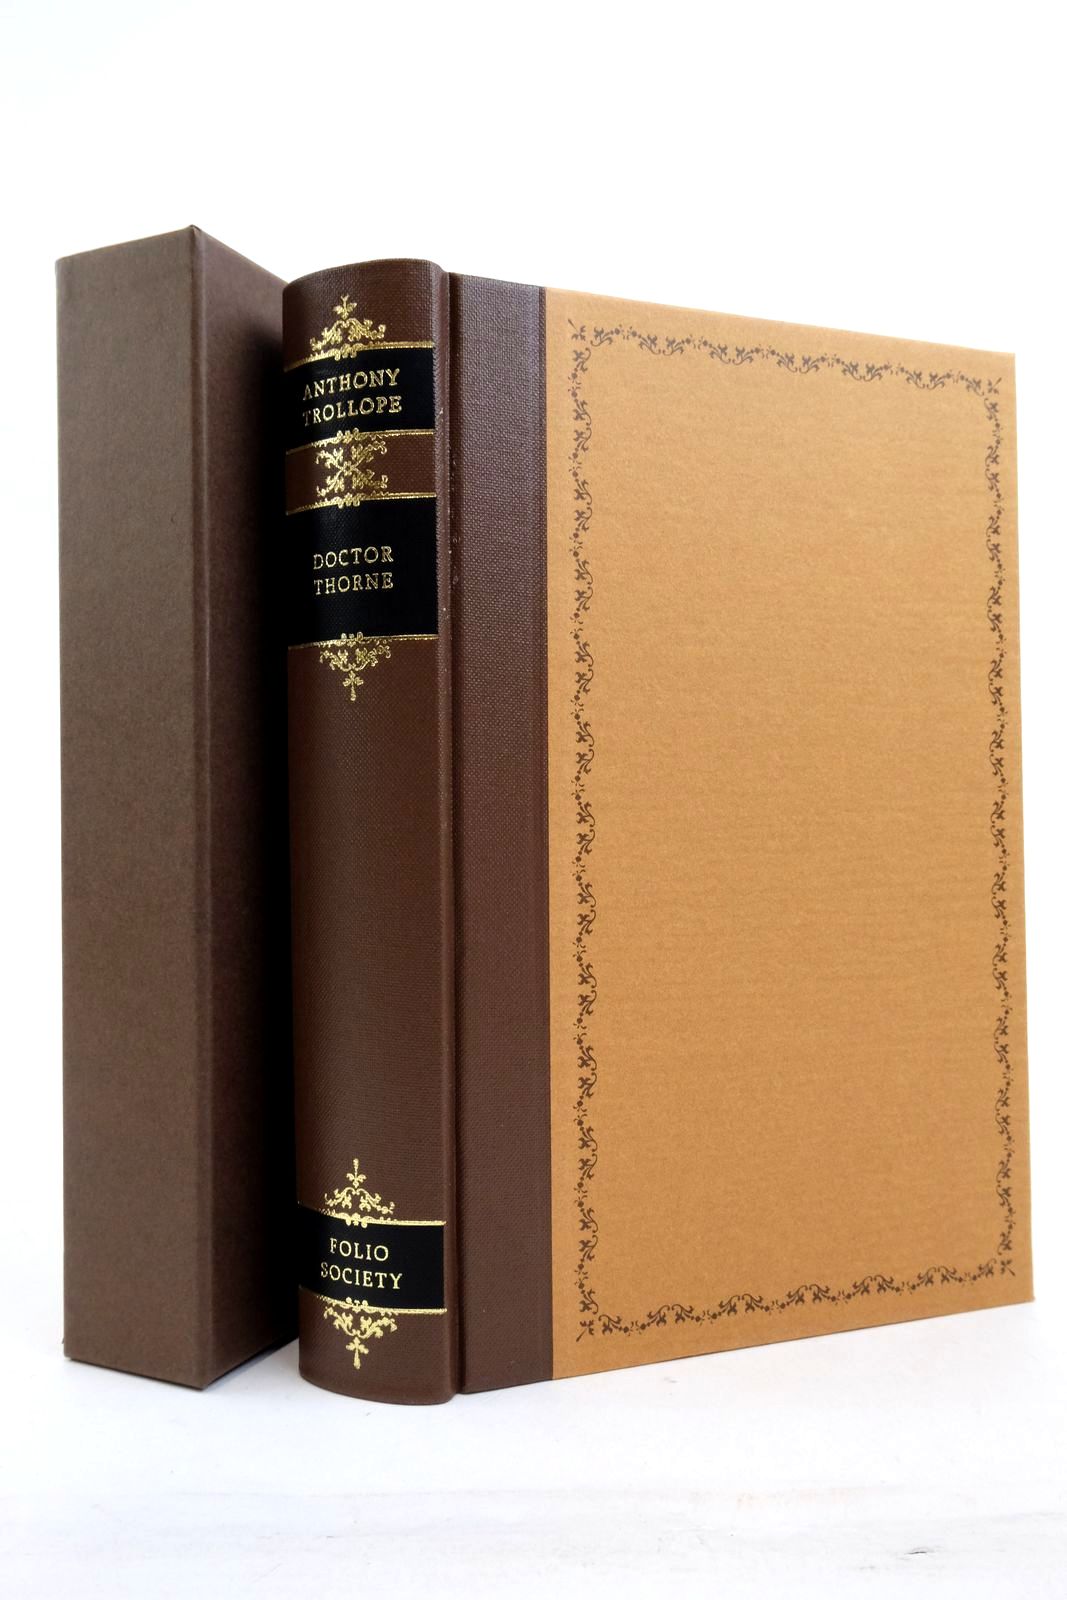 Photo of DOCTOR THORNE written by Trollope, Anthony illustrated by Pendle, Alexy published by Folio Society (STOCK CODE: 2138279)  for sale by Stella & Rose's Books